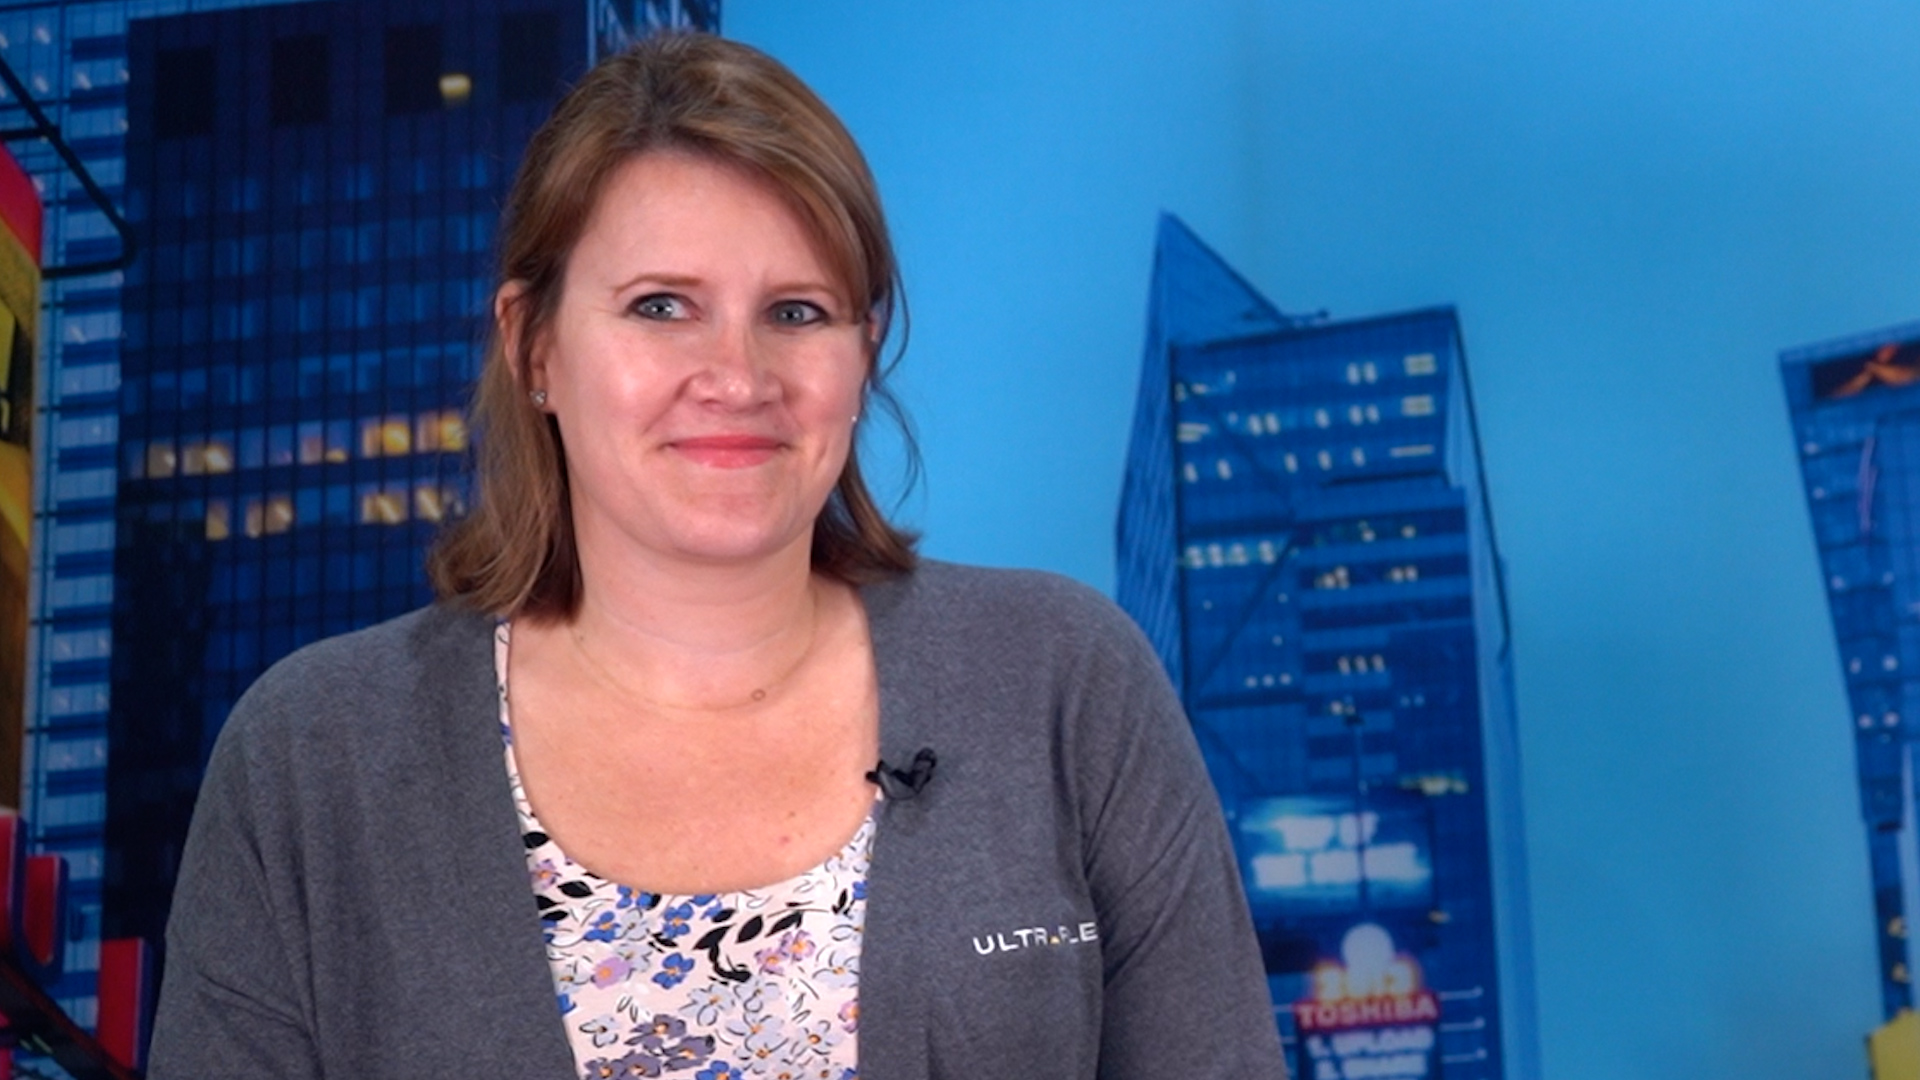 Video preview: Ultraflex’s Kylie Schleicher on Environmentally Friendly Substrates